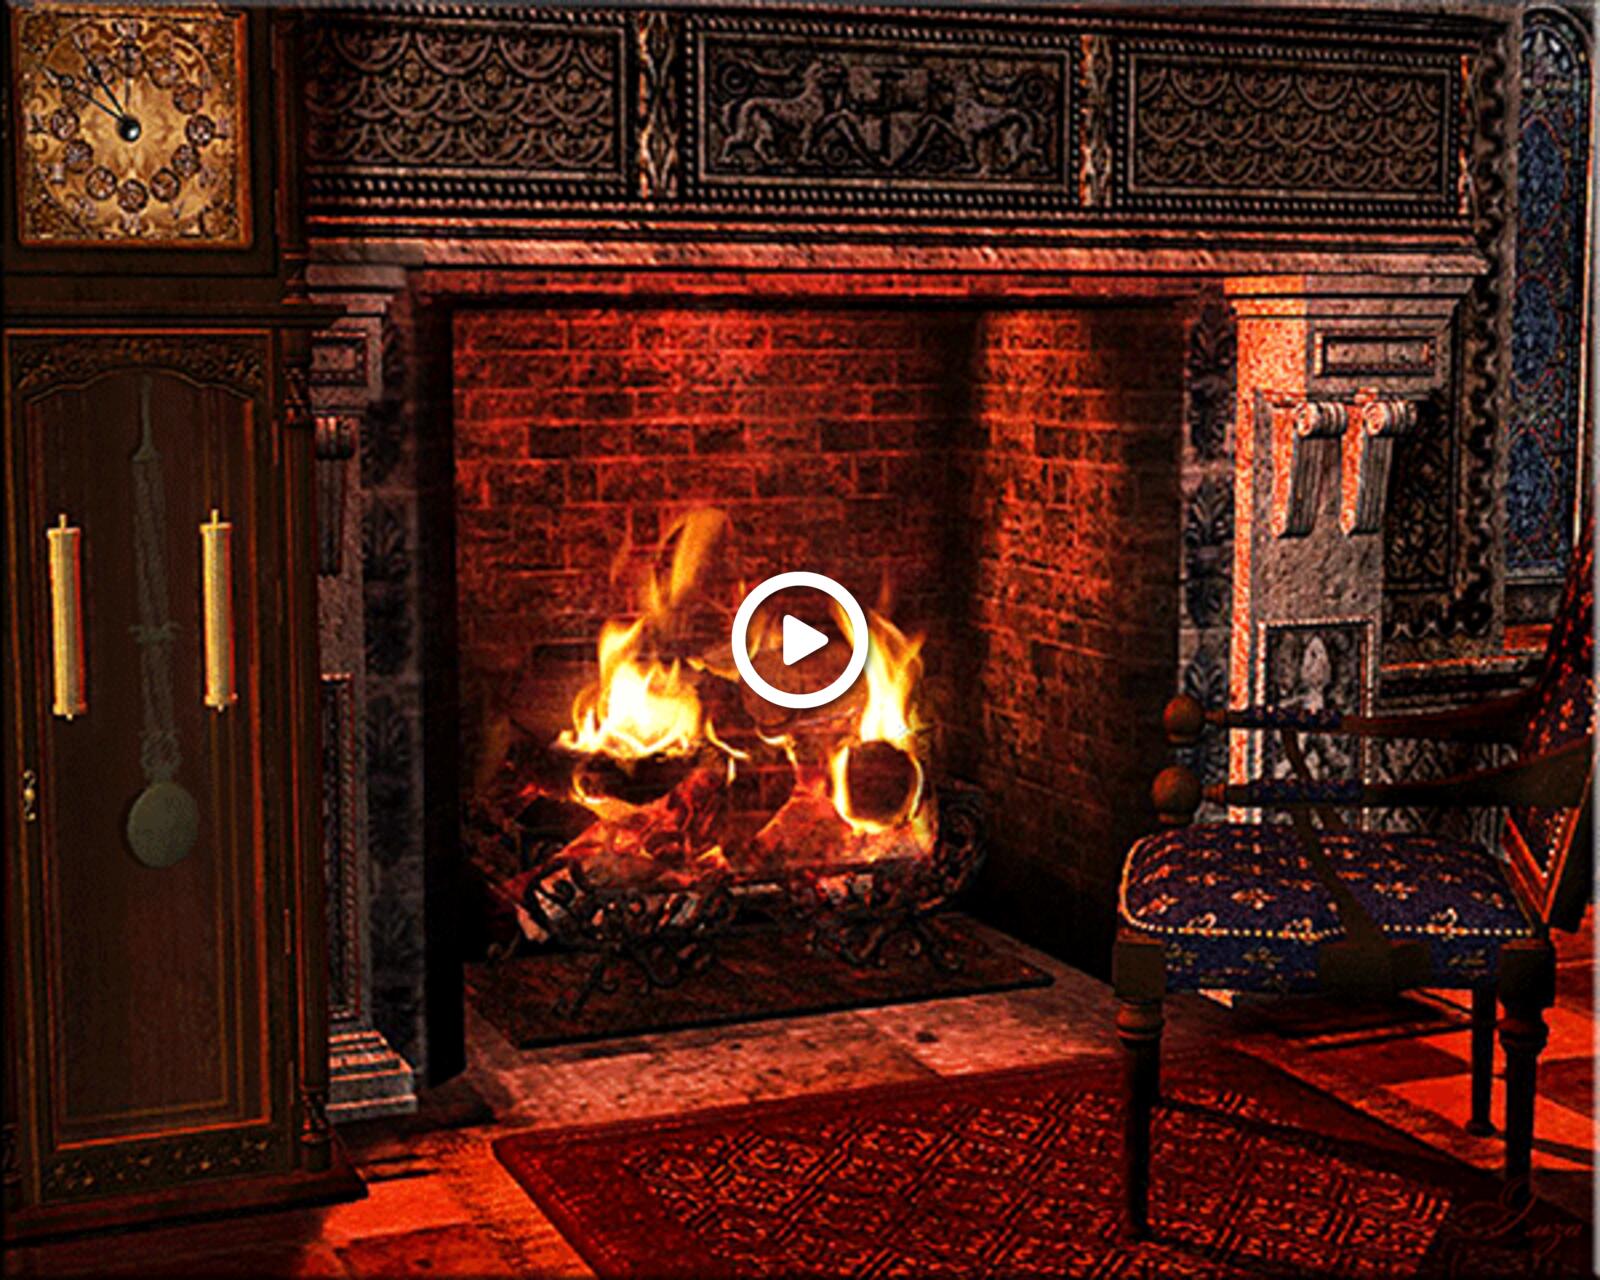 A postcard on the subject of bonfire fireplace animation for free